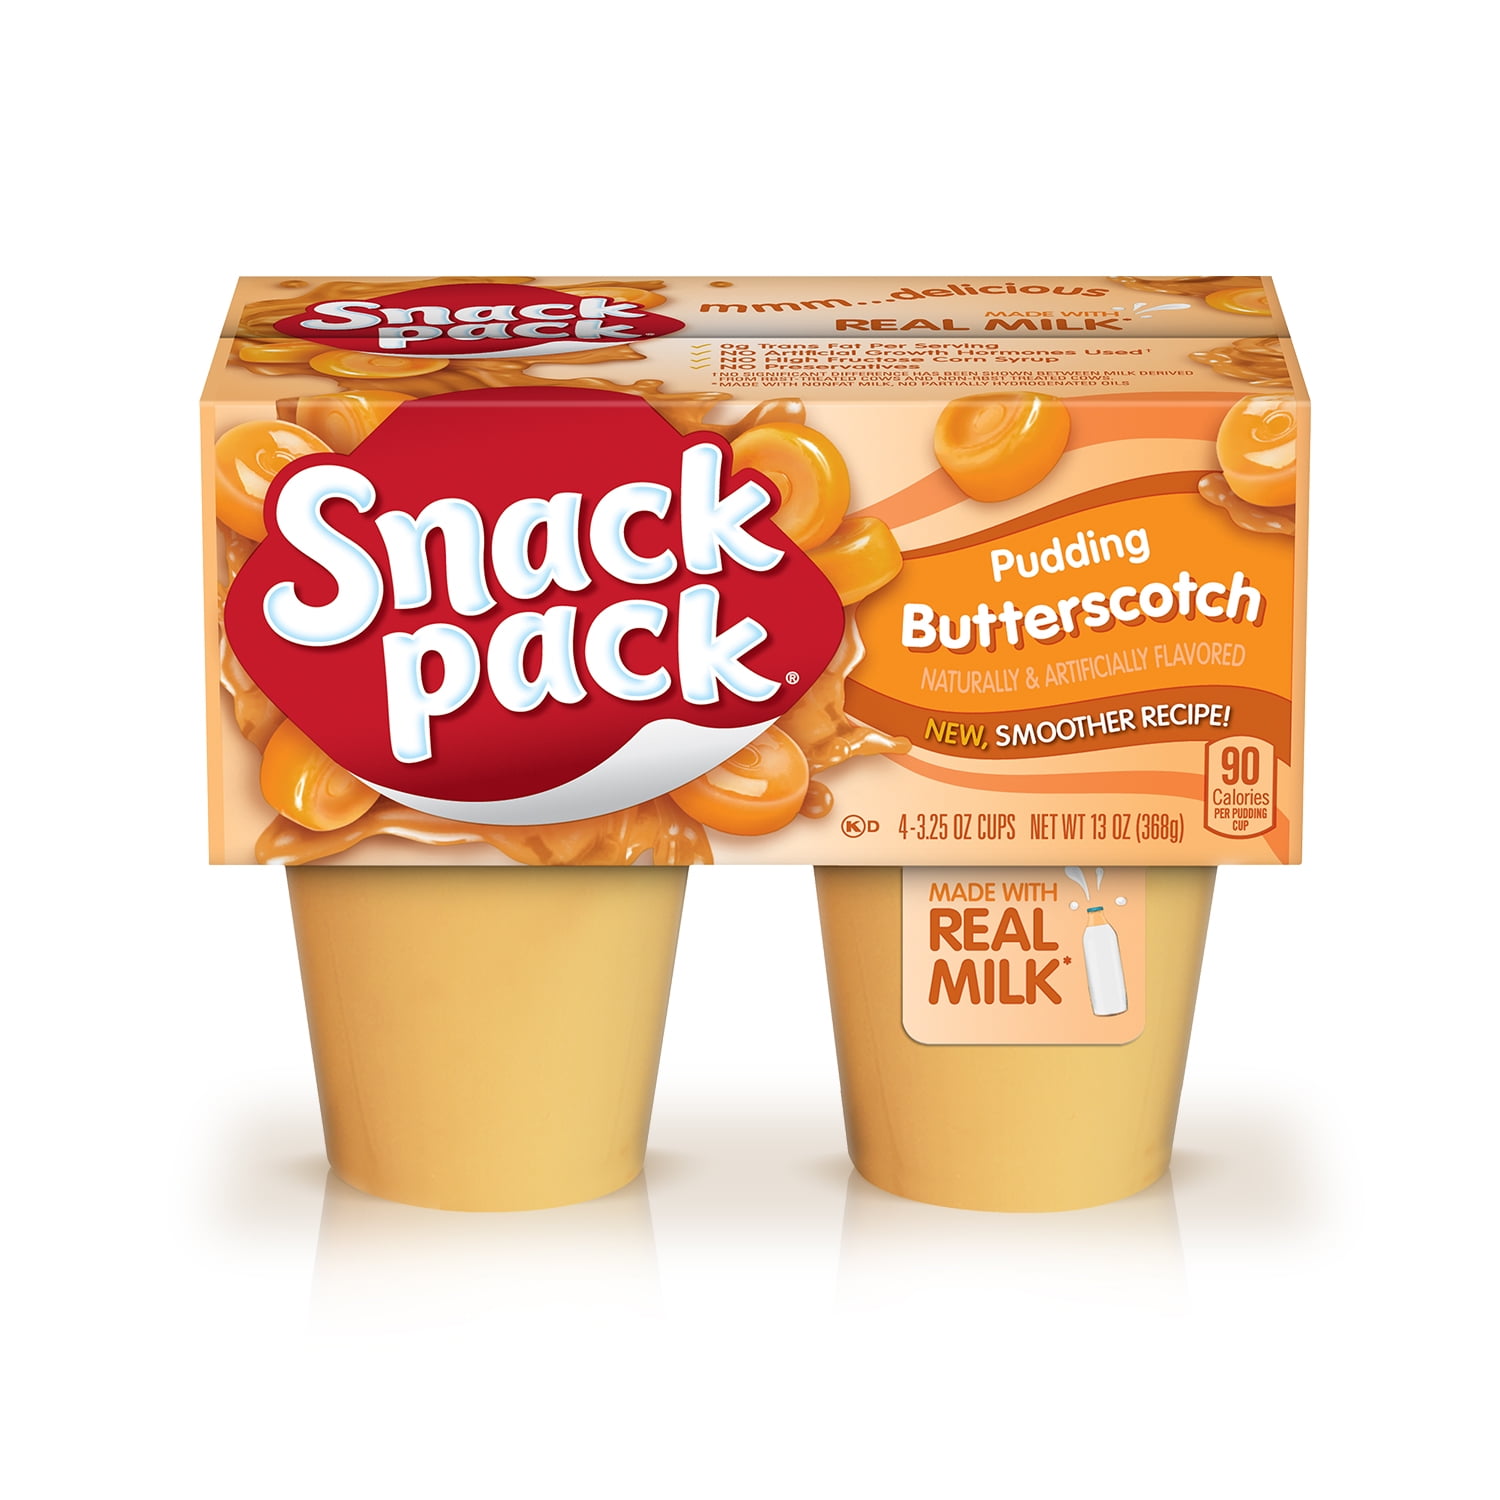 Snack Pack Butterscotch Flavored Pudding, 4 Count Pudding Cups (12 Pack)